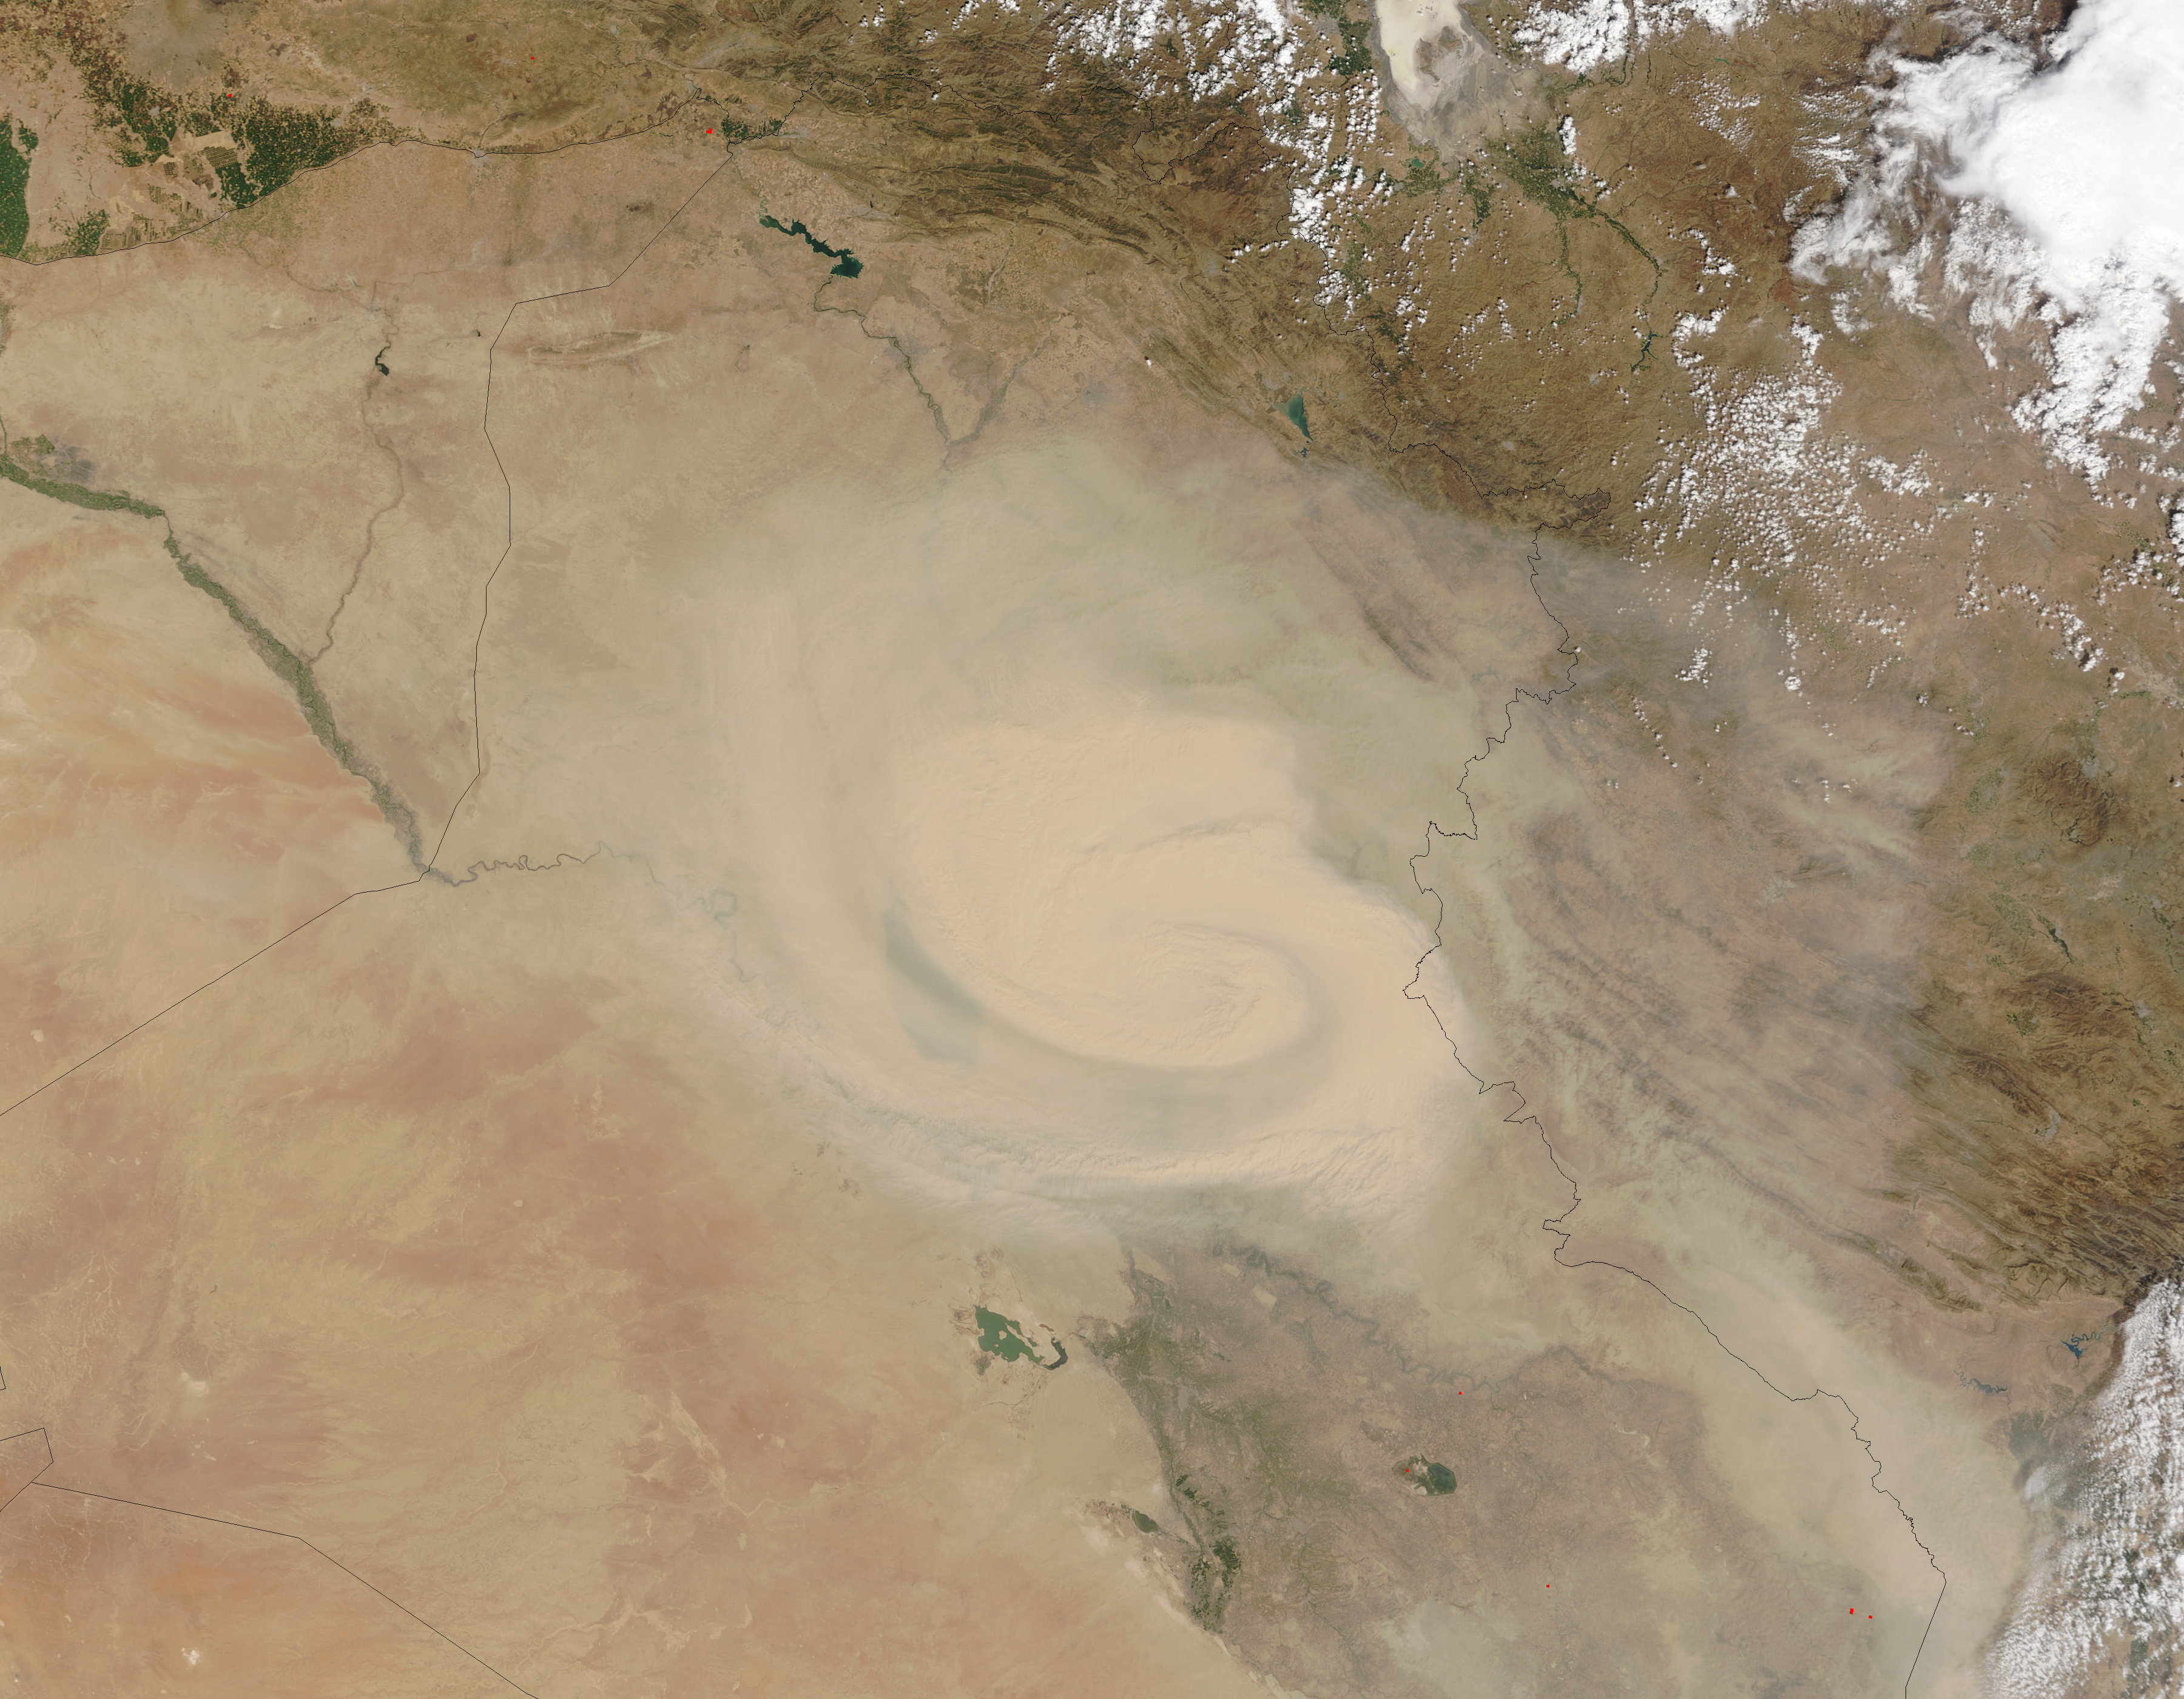 Dust Marches Across Iraq and Iran - related image preview